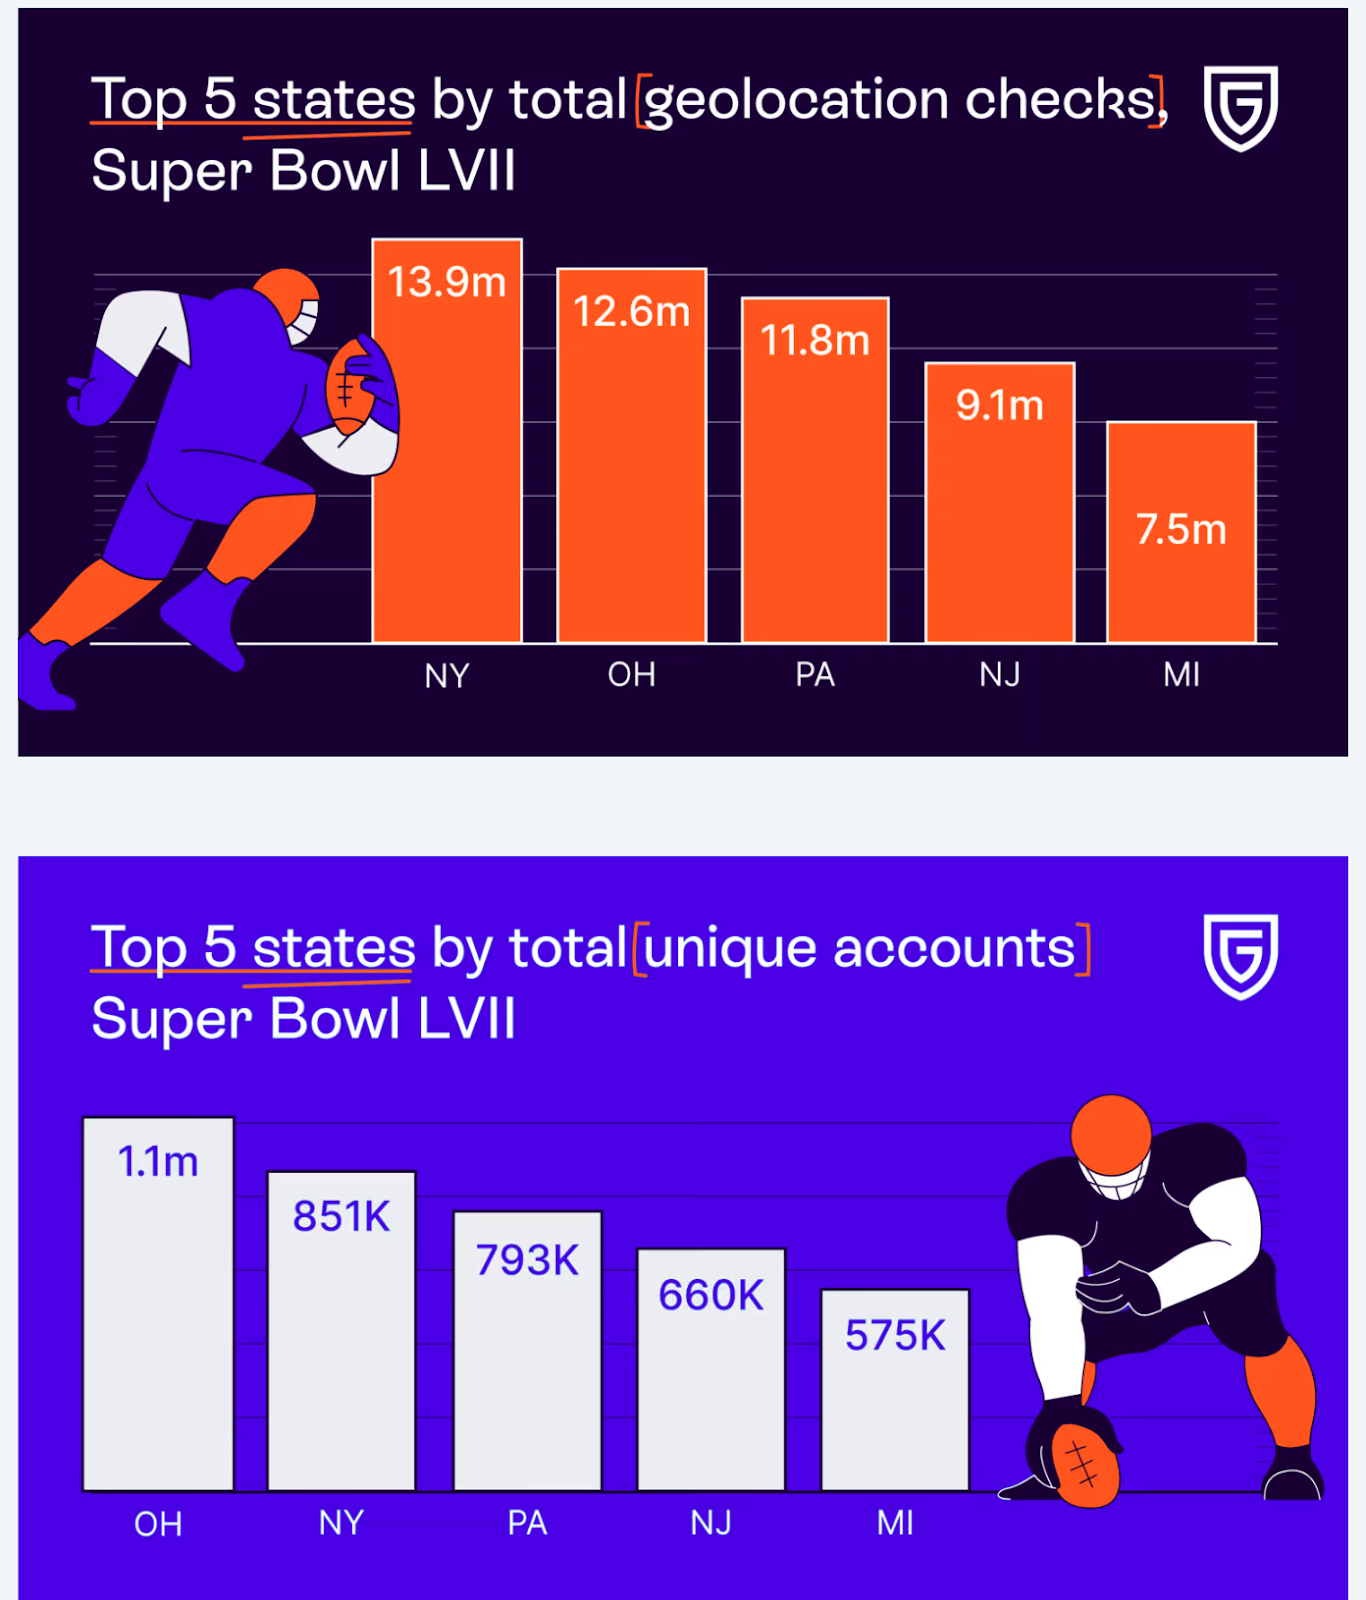 Super Bowl LVII sees a record number of bets as states open up